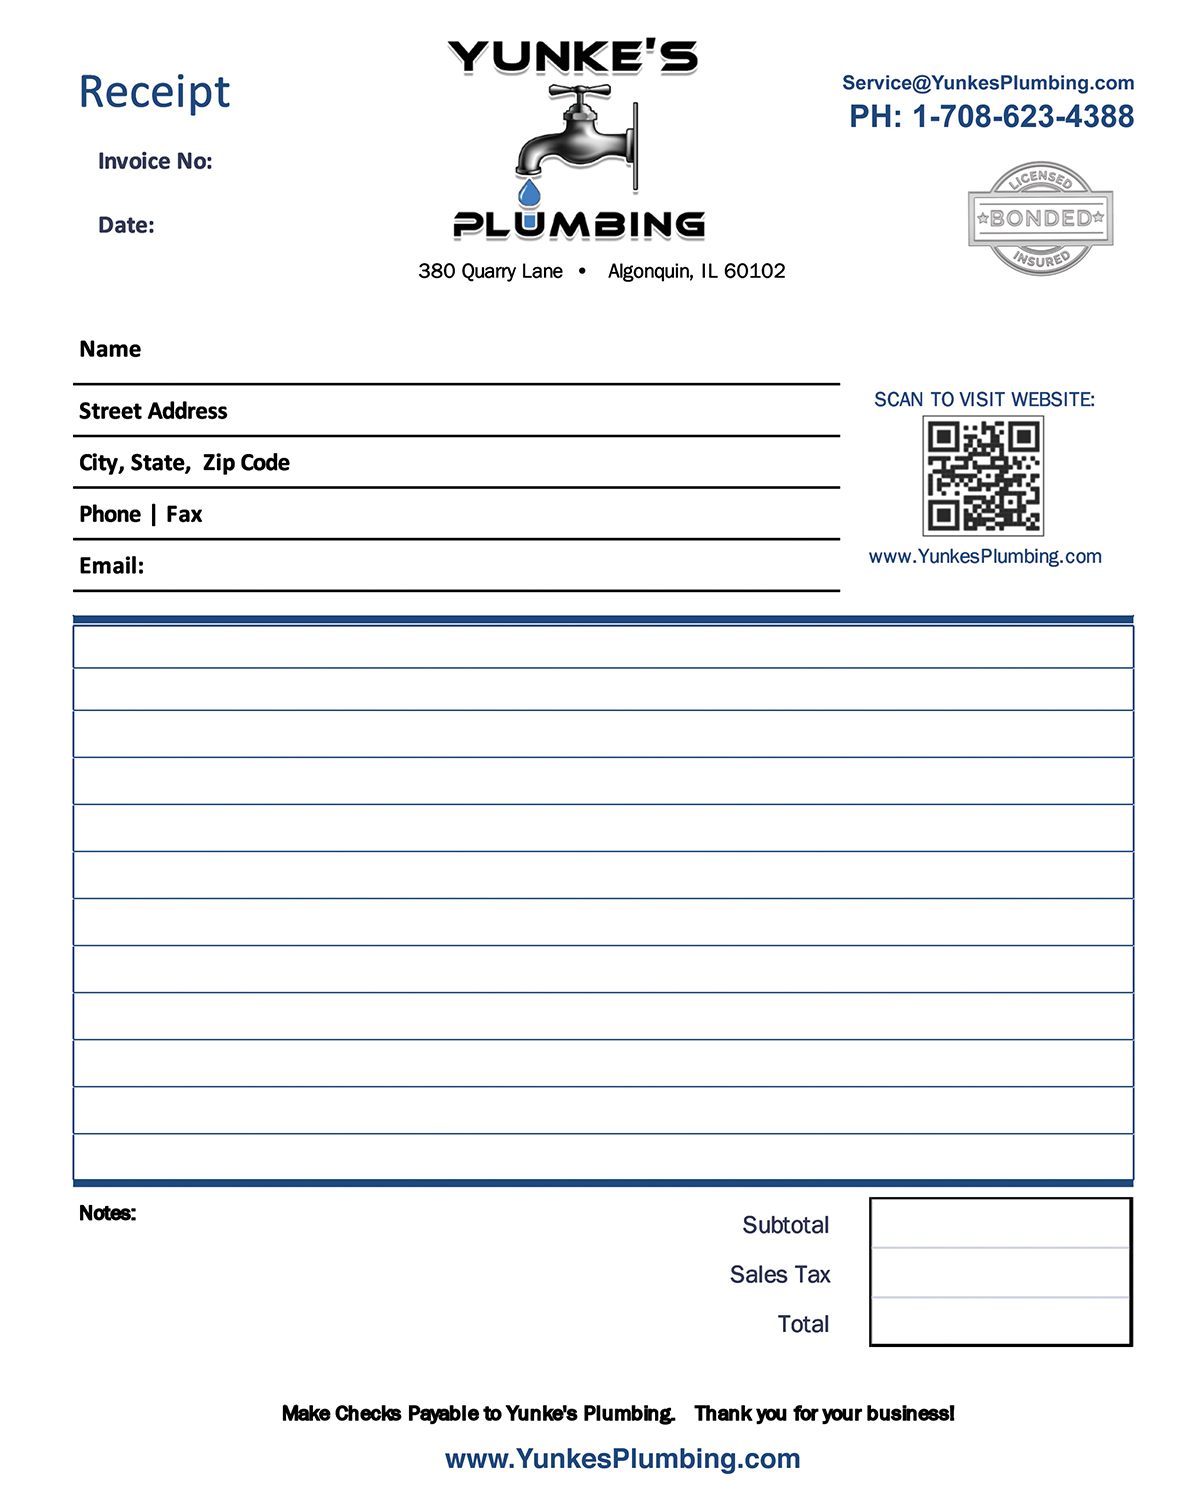 Receipt pads printed to match this contractor website design in Algonquin